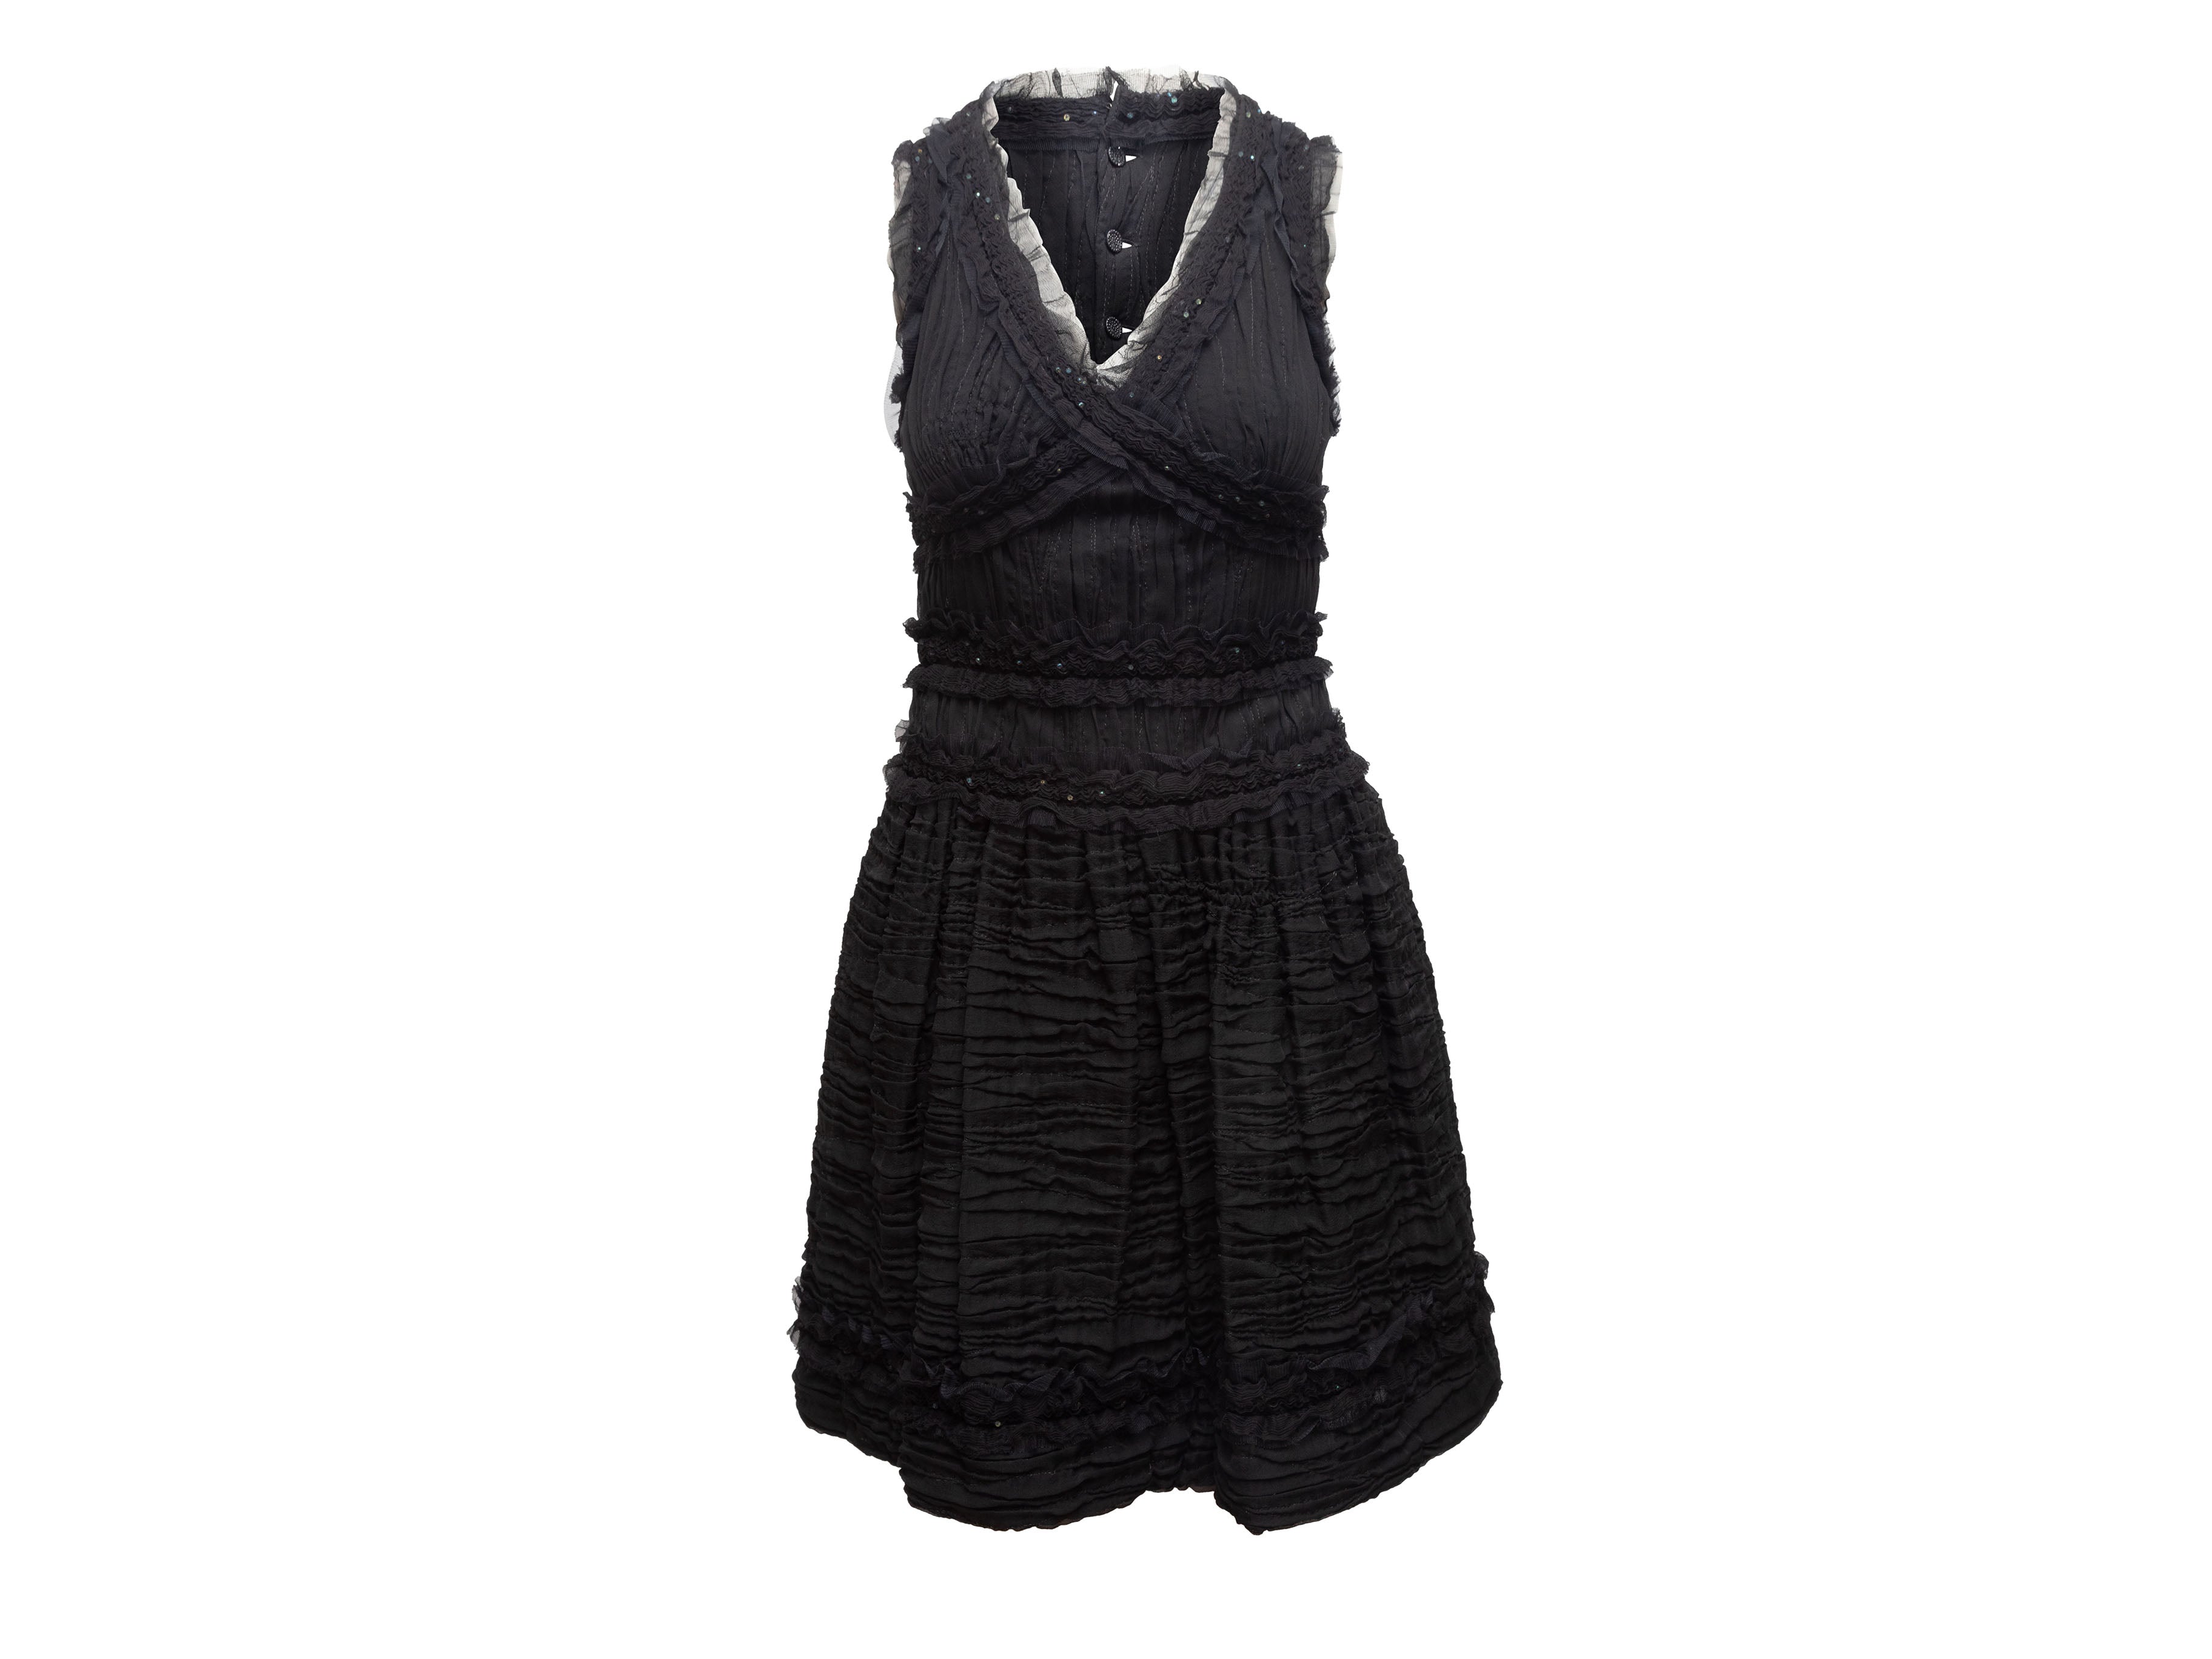 Black Chanel Fall 2005 Textured Sleeveless Dress, RvceShops Revival